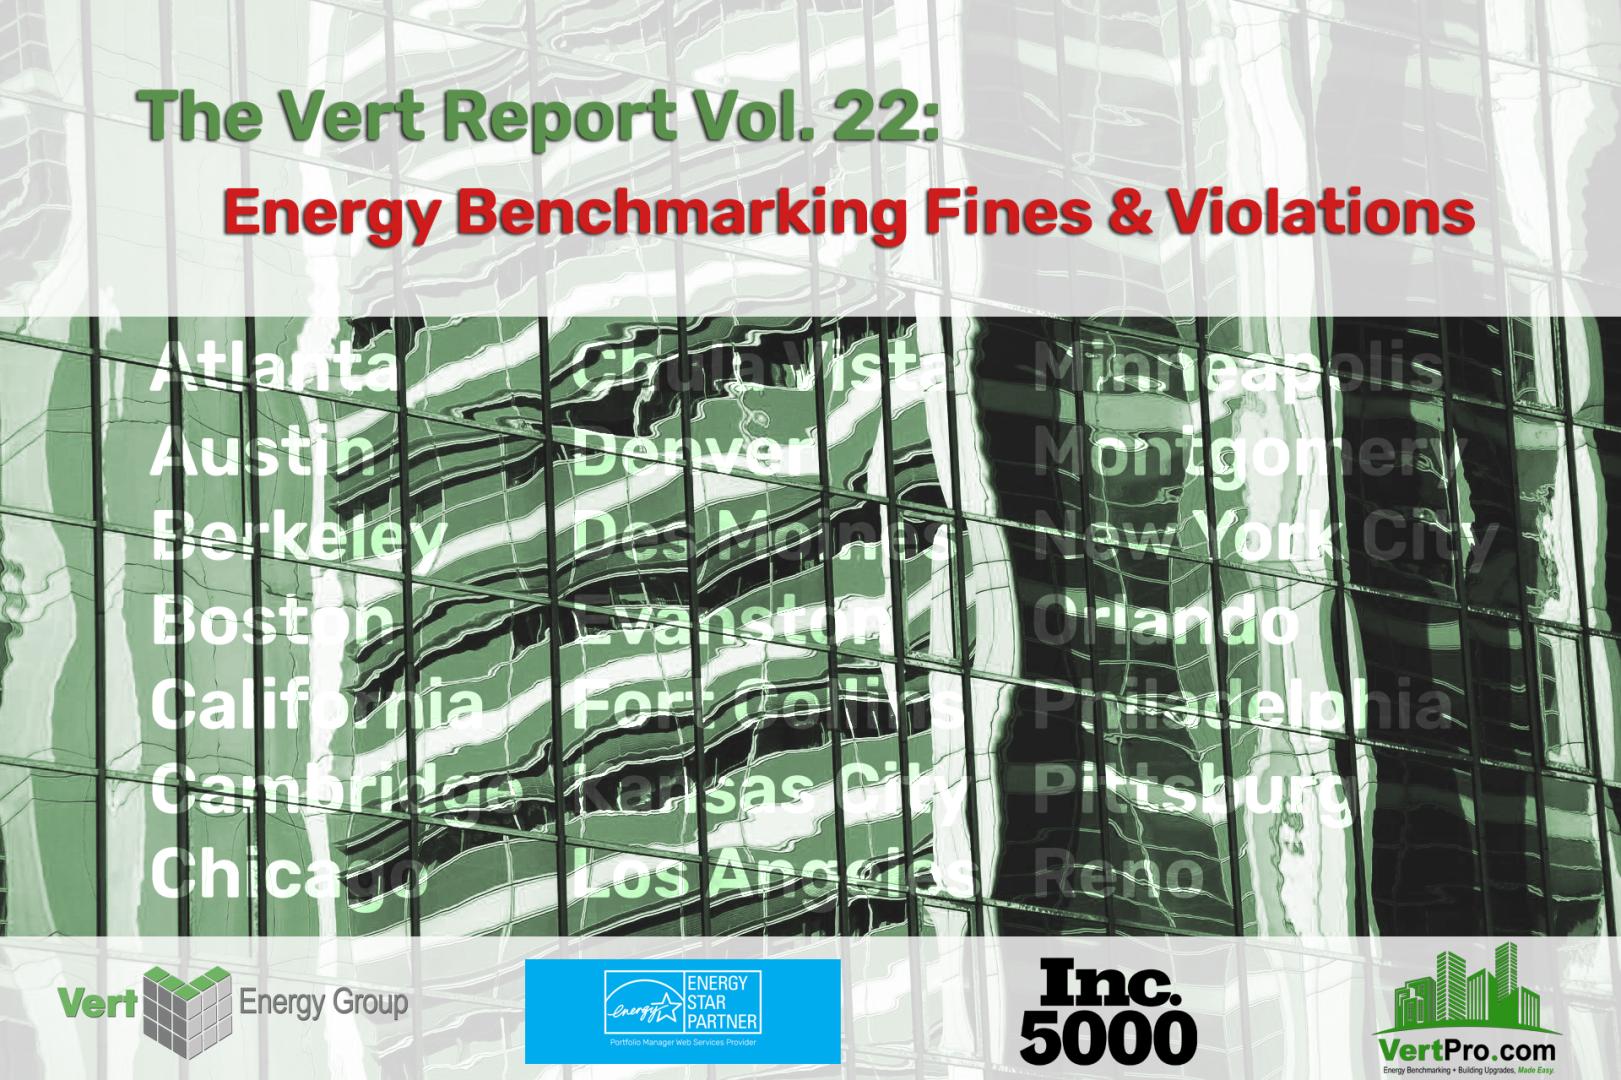 Energy Benchmarking Fines & Violations